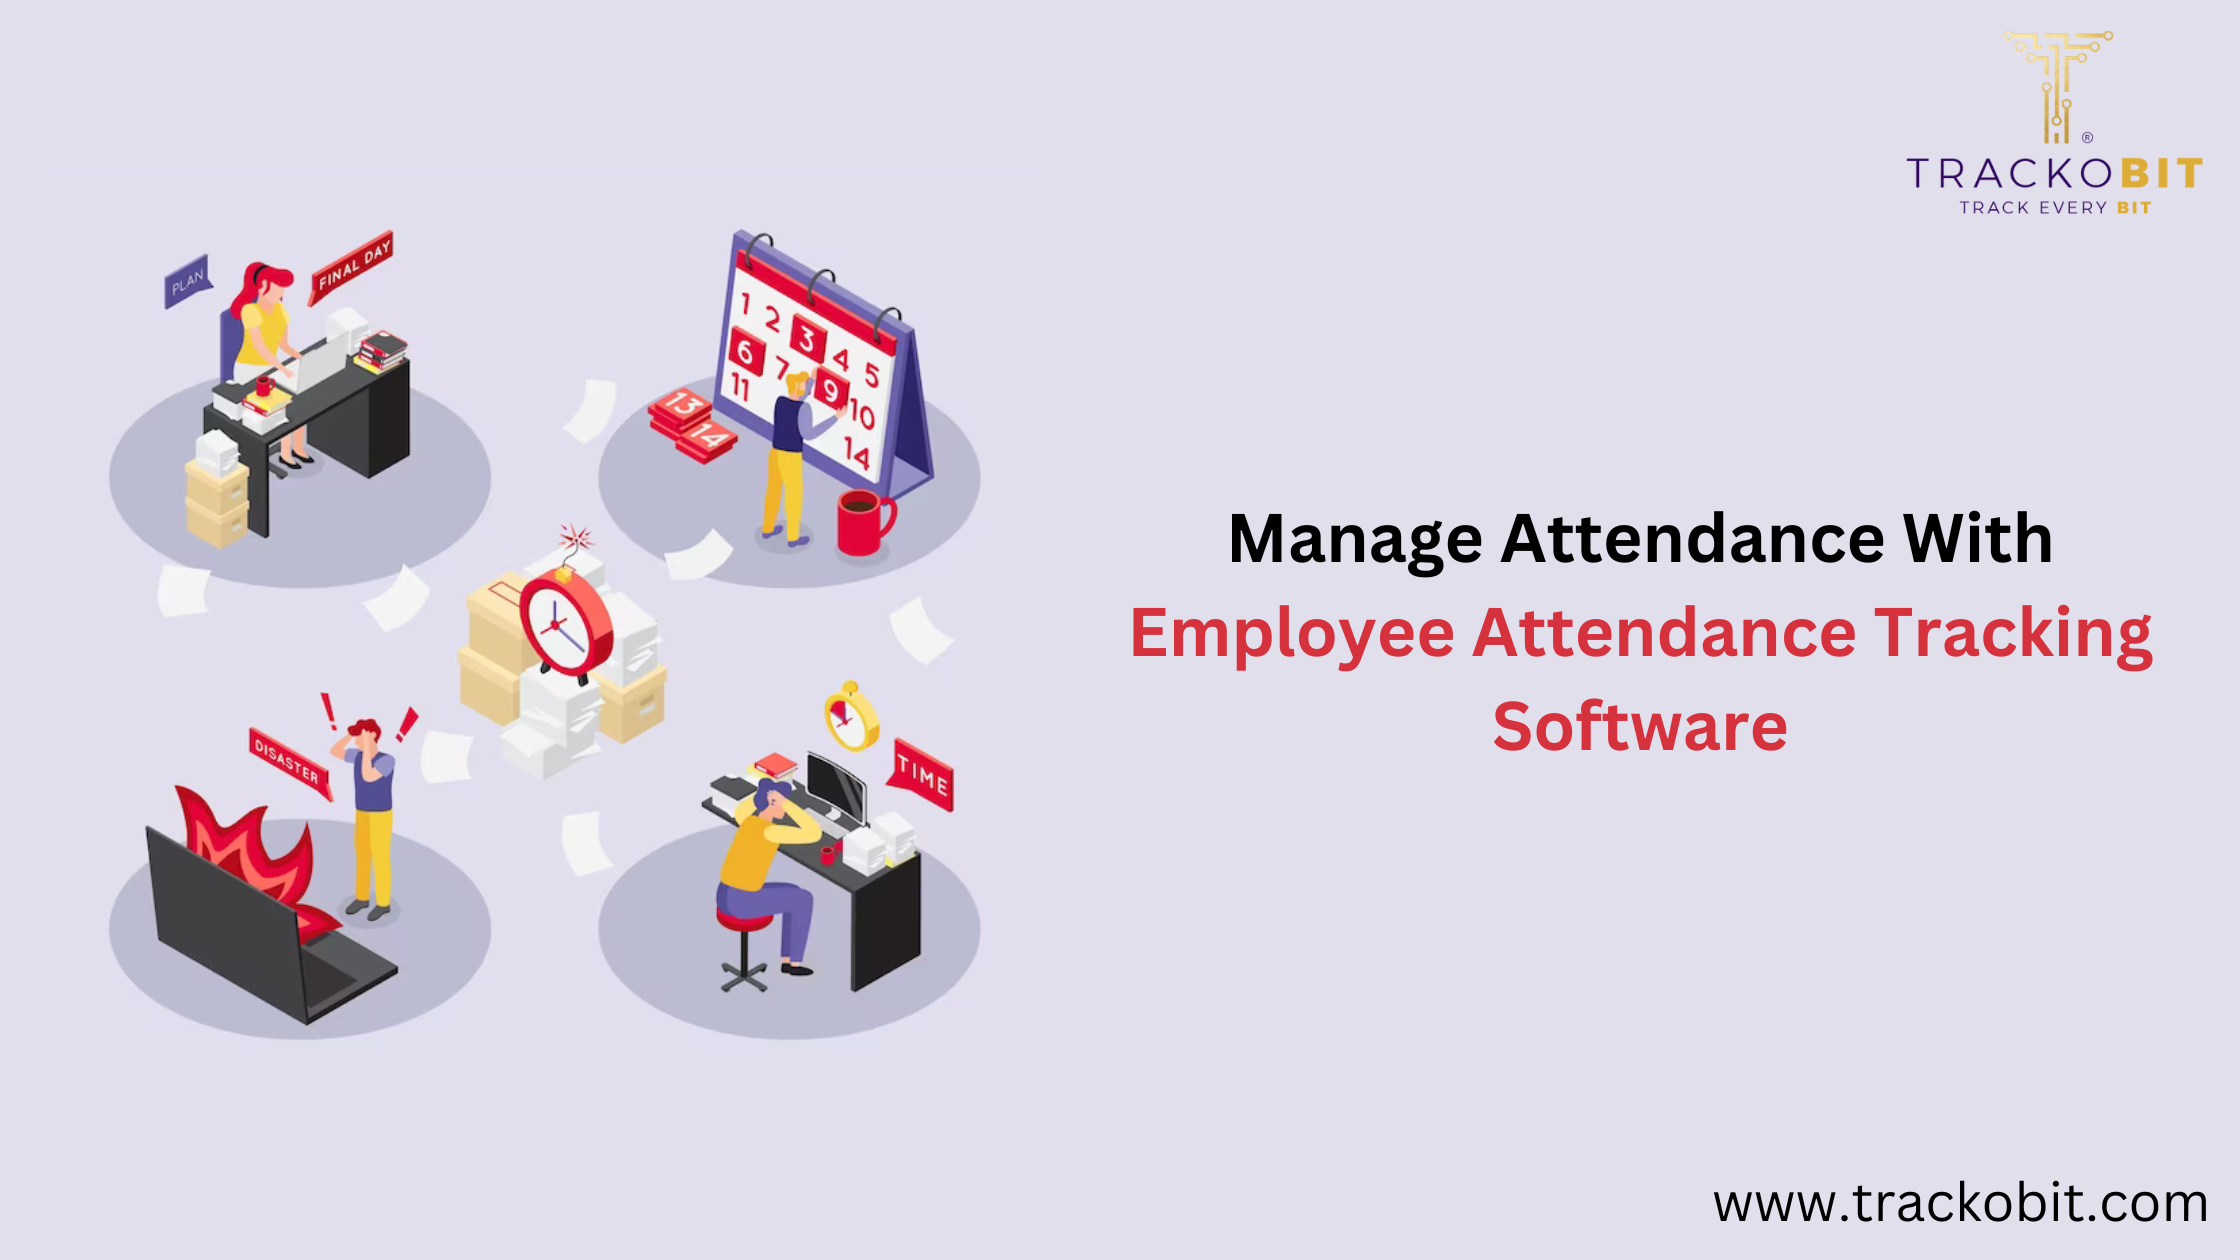 Manage Attendance With Employee Attendance Tracking Software